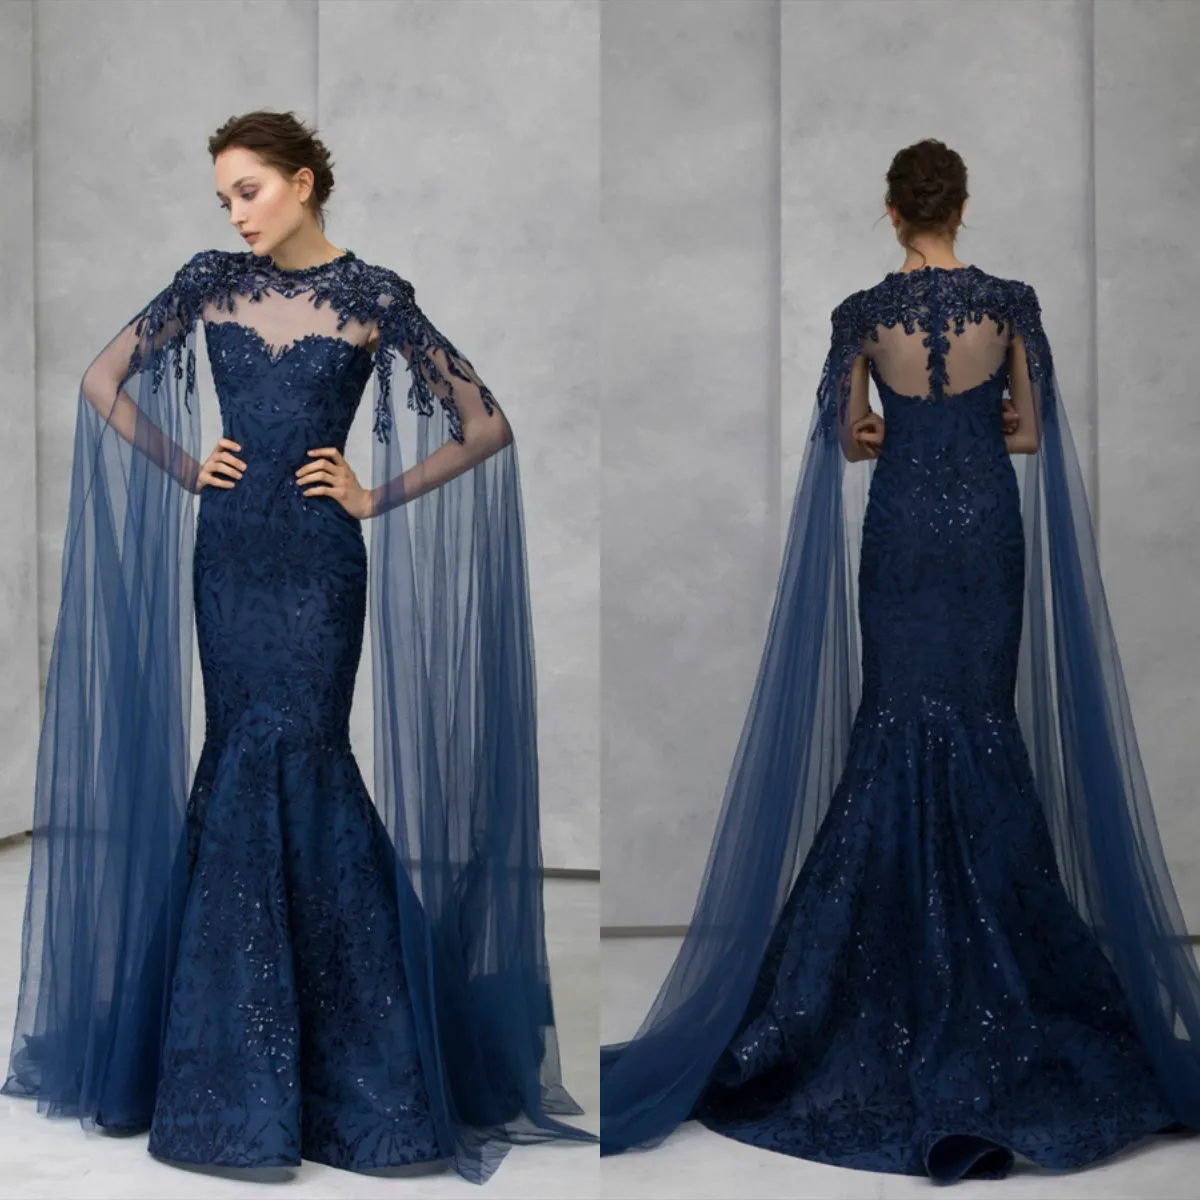 2020 Gorgeous Evening Dresses With Wrap Cape Lace Appliqued Beaded Mermaid Prom Dress Tony Ward Formal Party Gowns Robes De Soirée